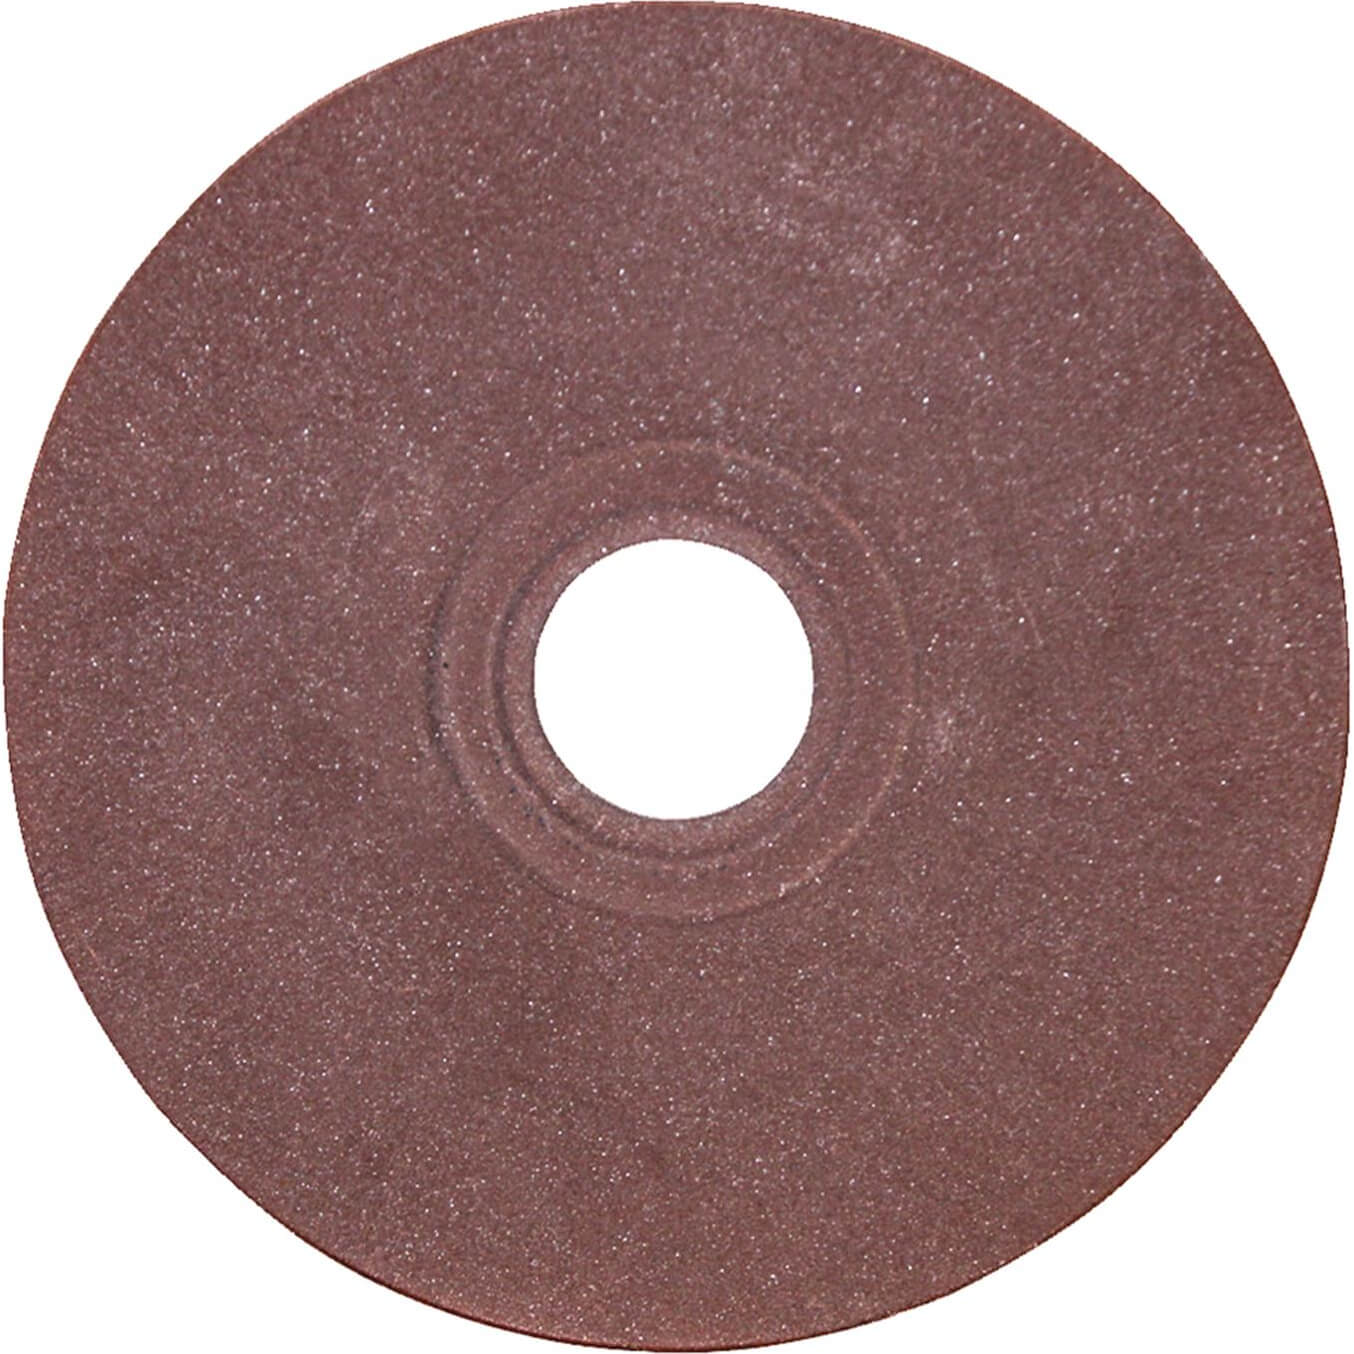 Image of Faithfull Replacement Chainsaw Sharpener Grinding Wheel